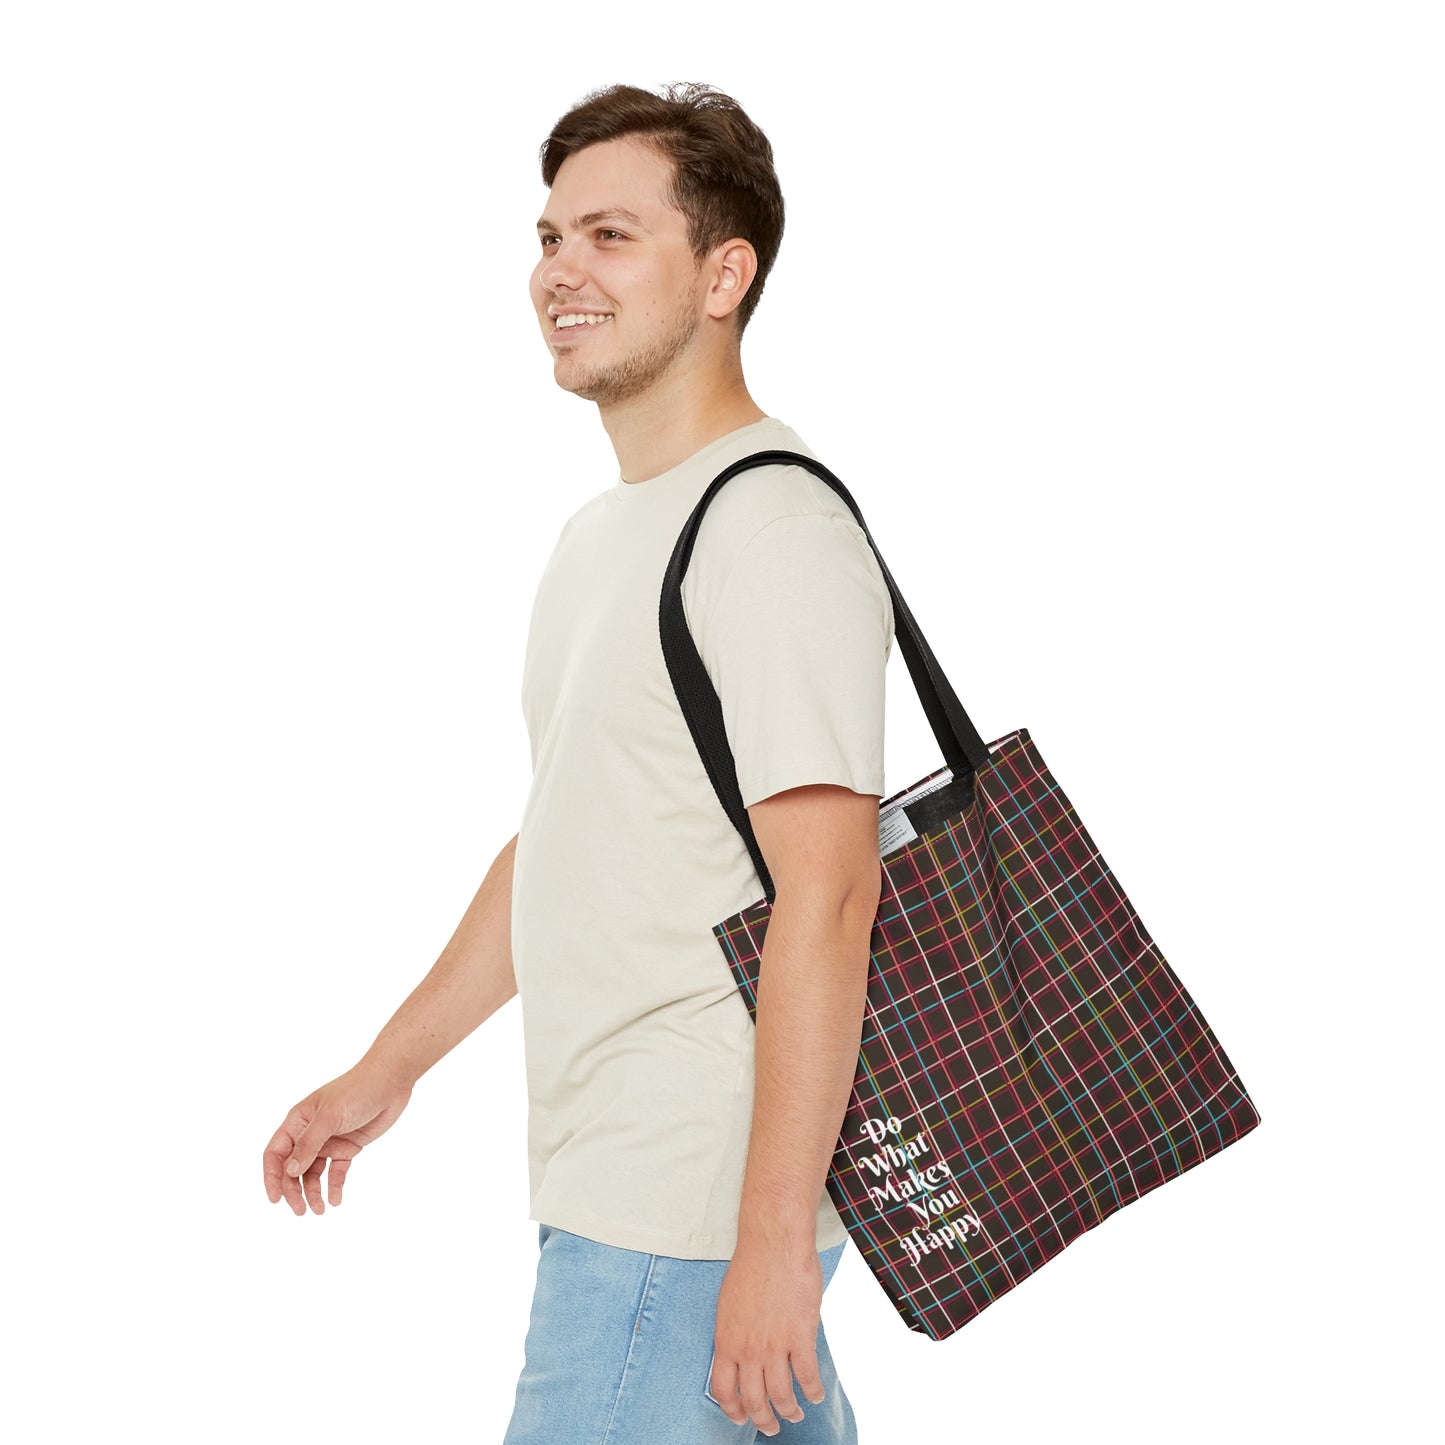 Fleeting Brown Plaid "Do What Makes You Happy" Tote Bag